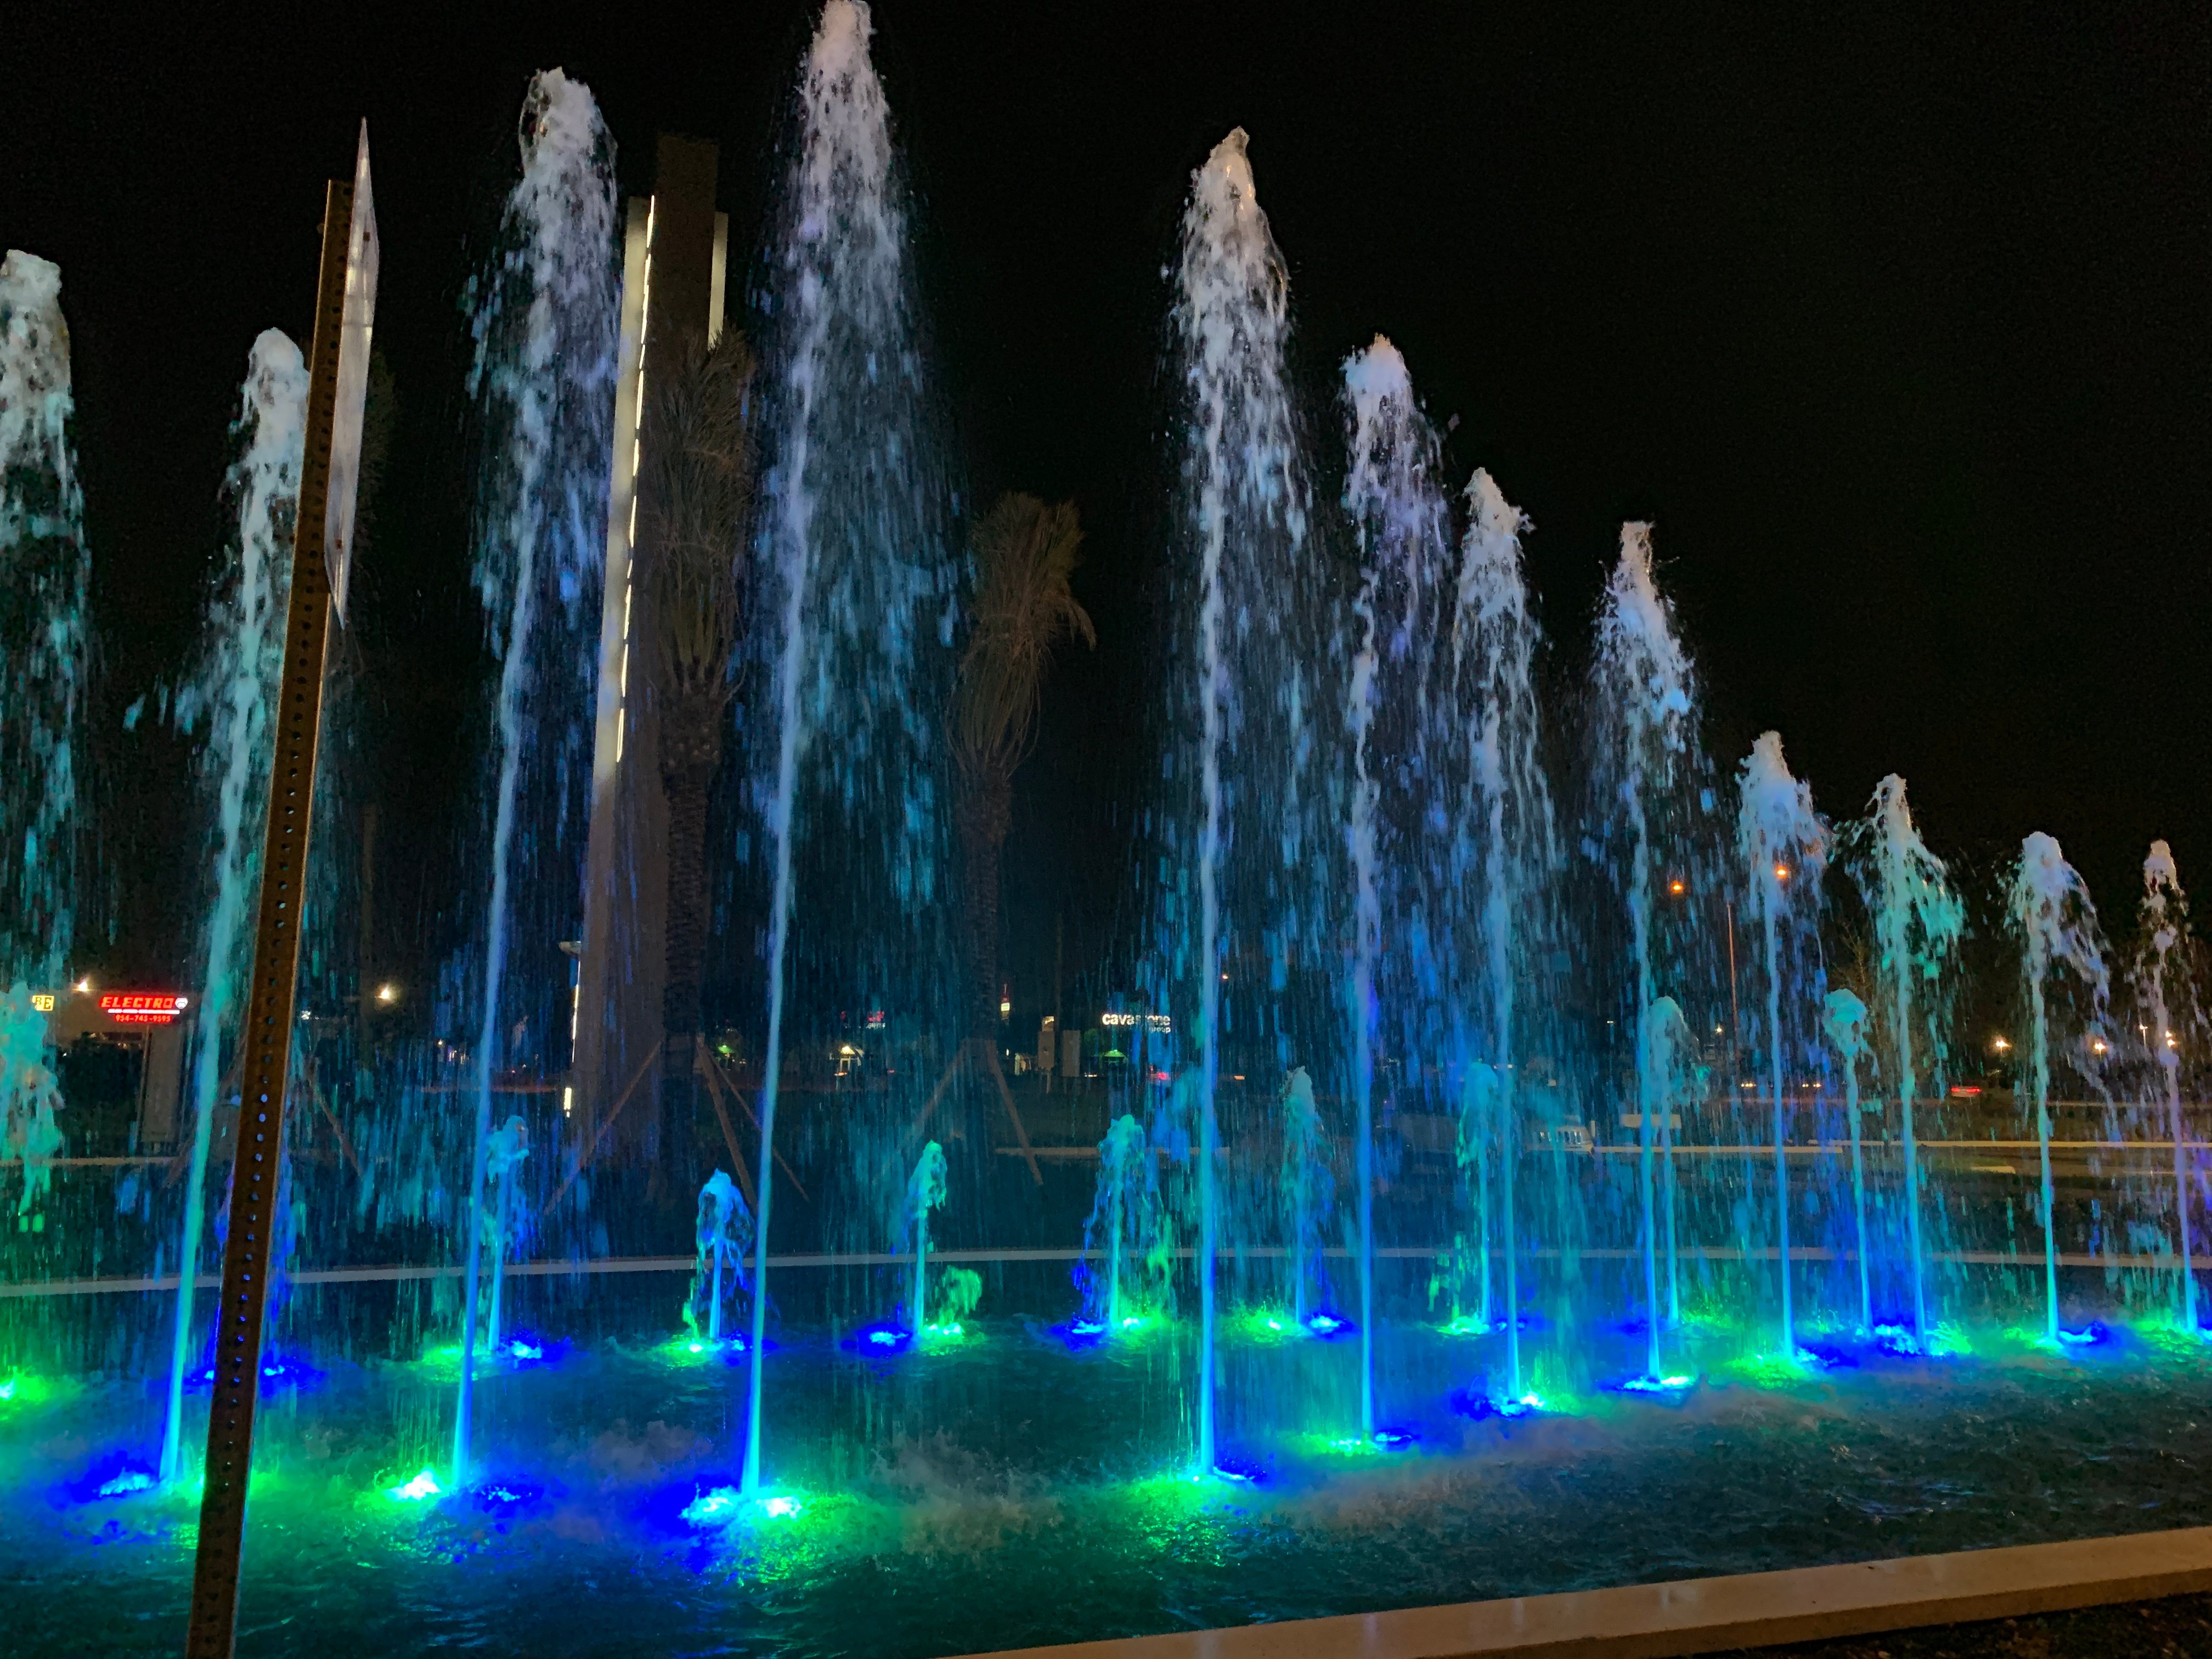 Fountain People's Design Process: Bringing Water Features to Life